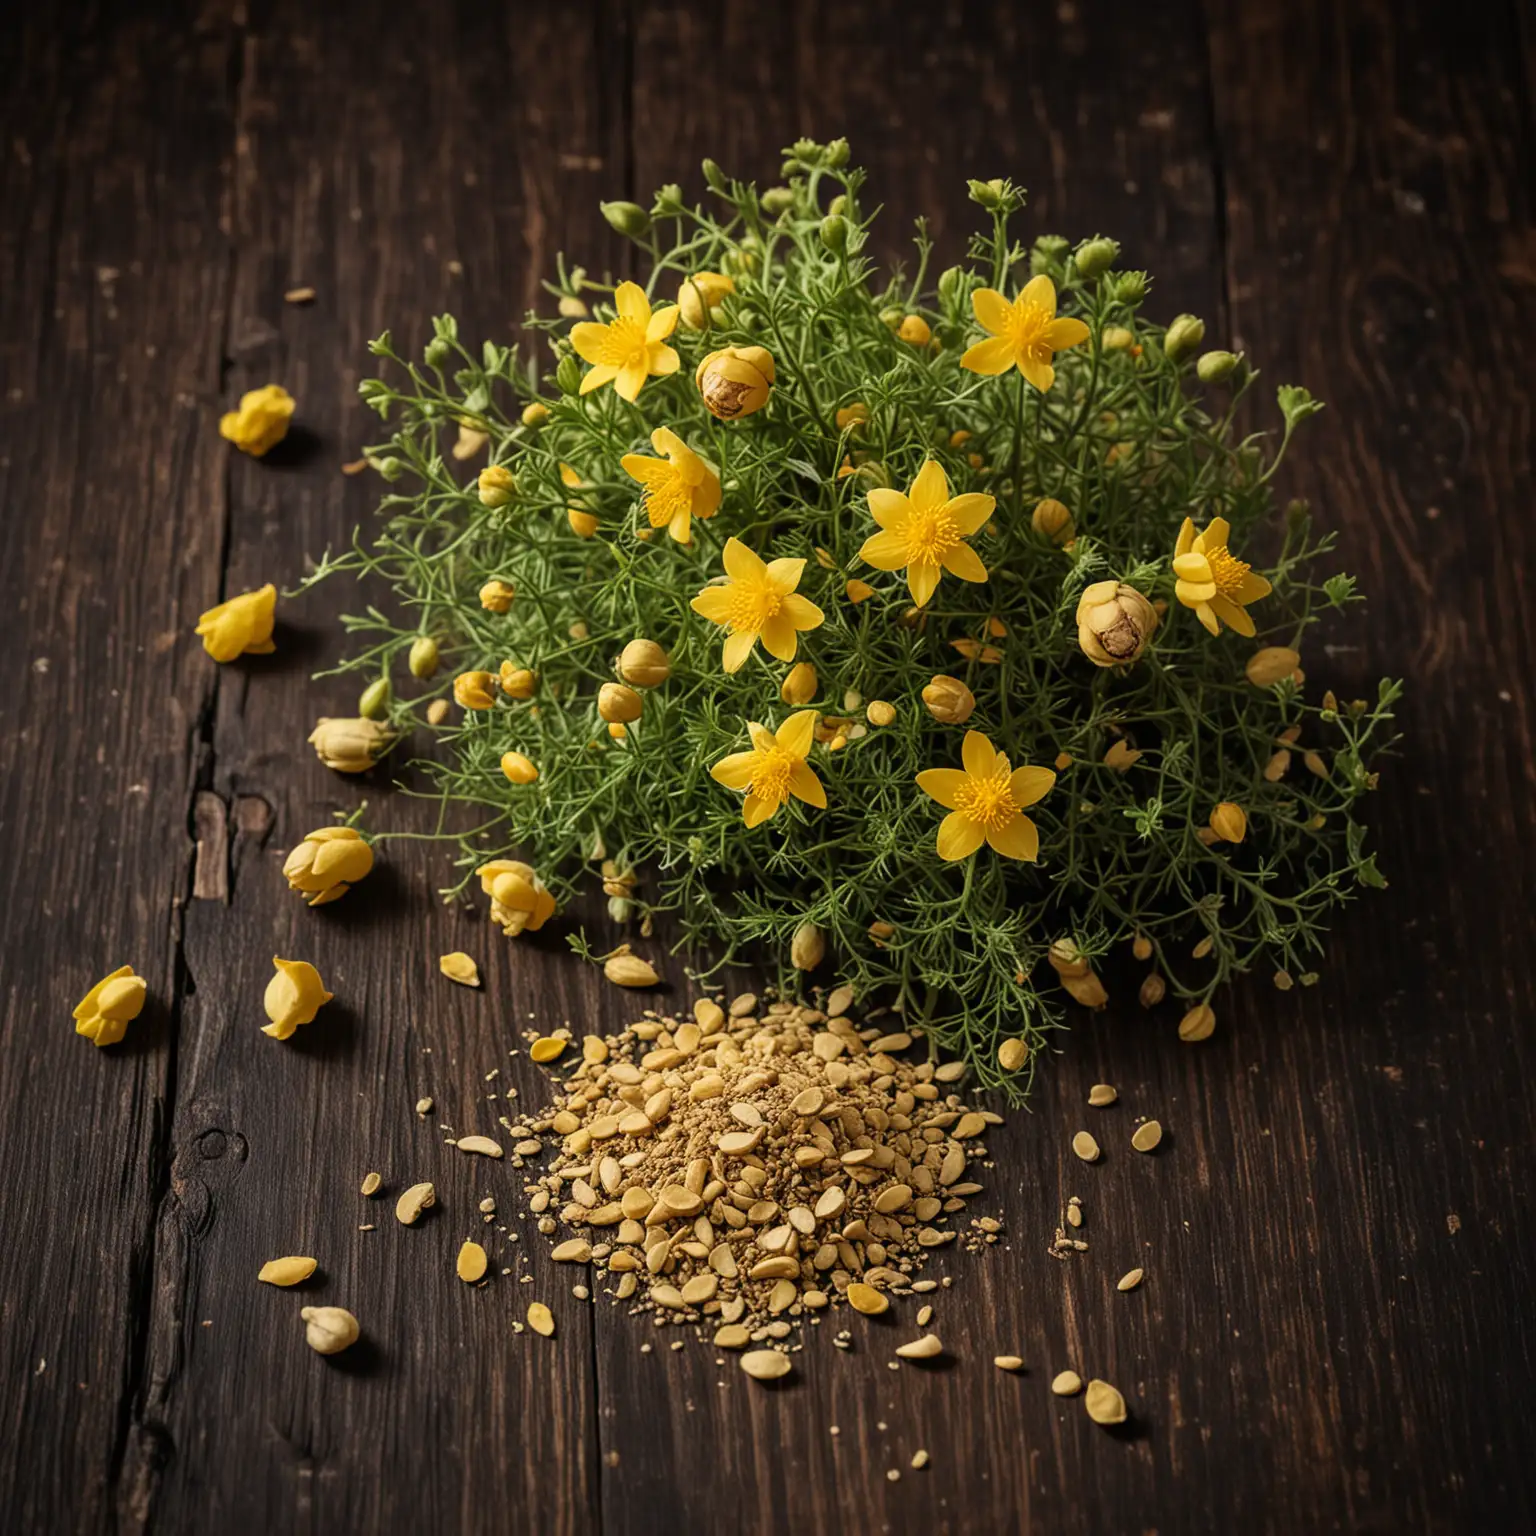 Tribulus Terrestris in plant, seed, and powder form on dark wooden table with selective focus